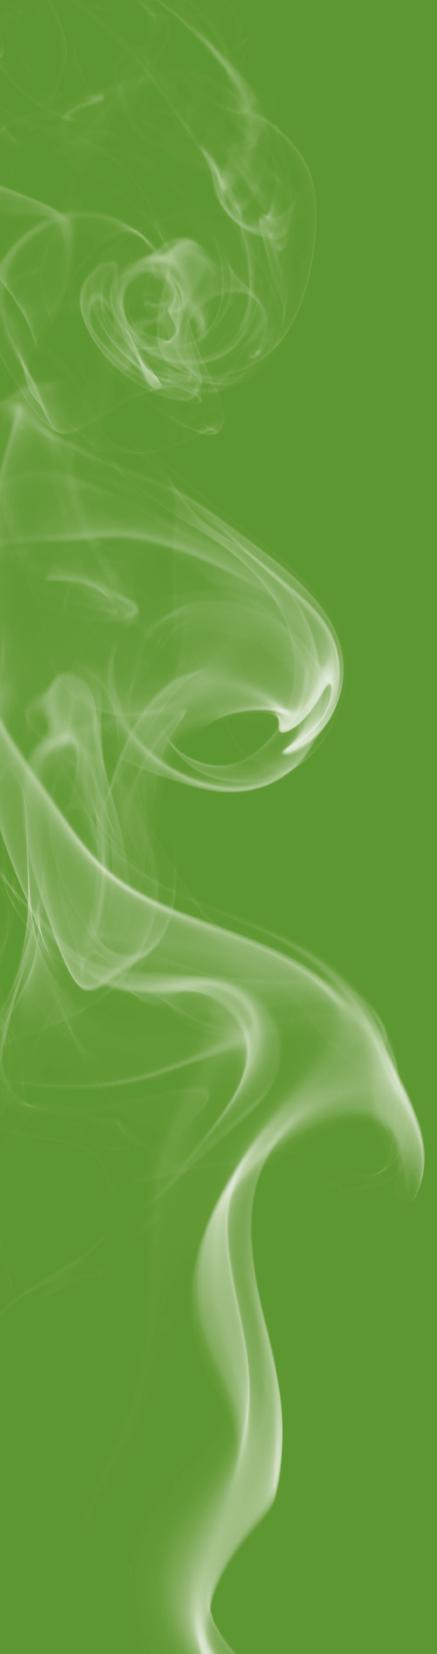 triggers and high risk situations Before you change your smoking it helps to know when you are most likely to use cannabis. High risk situations include times and places where you usually smoke.